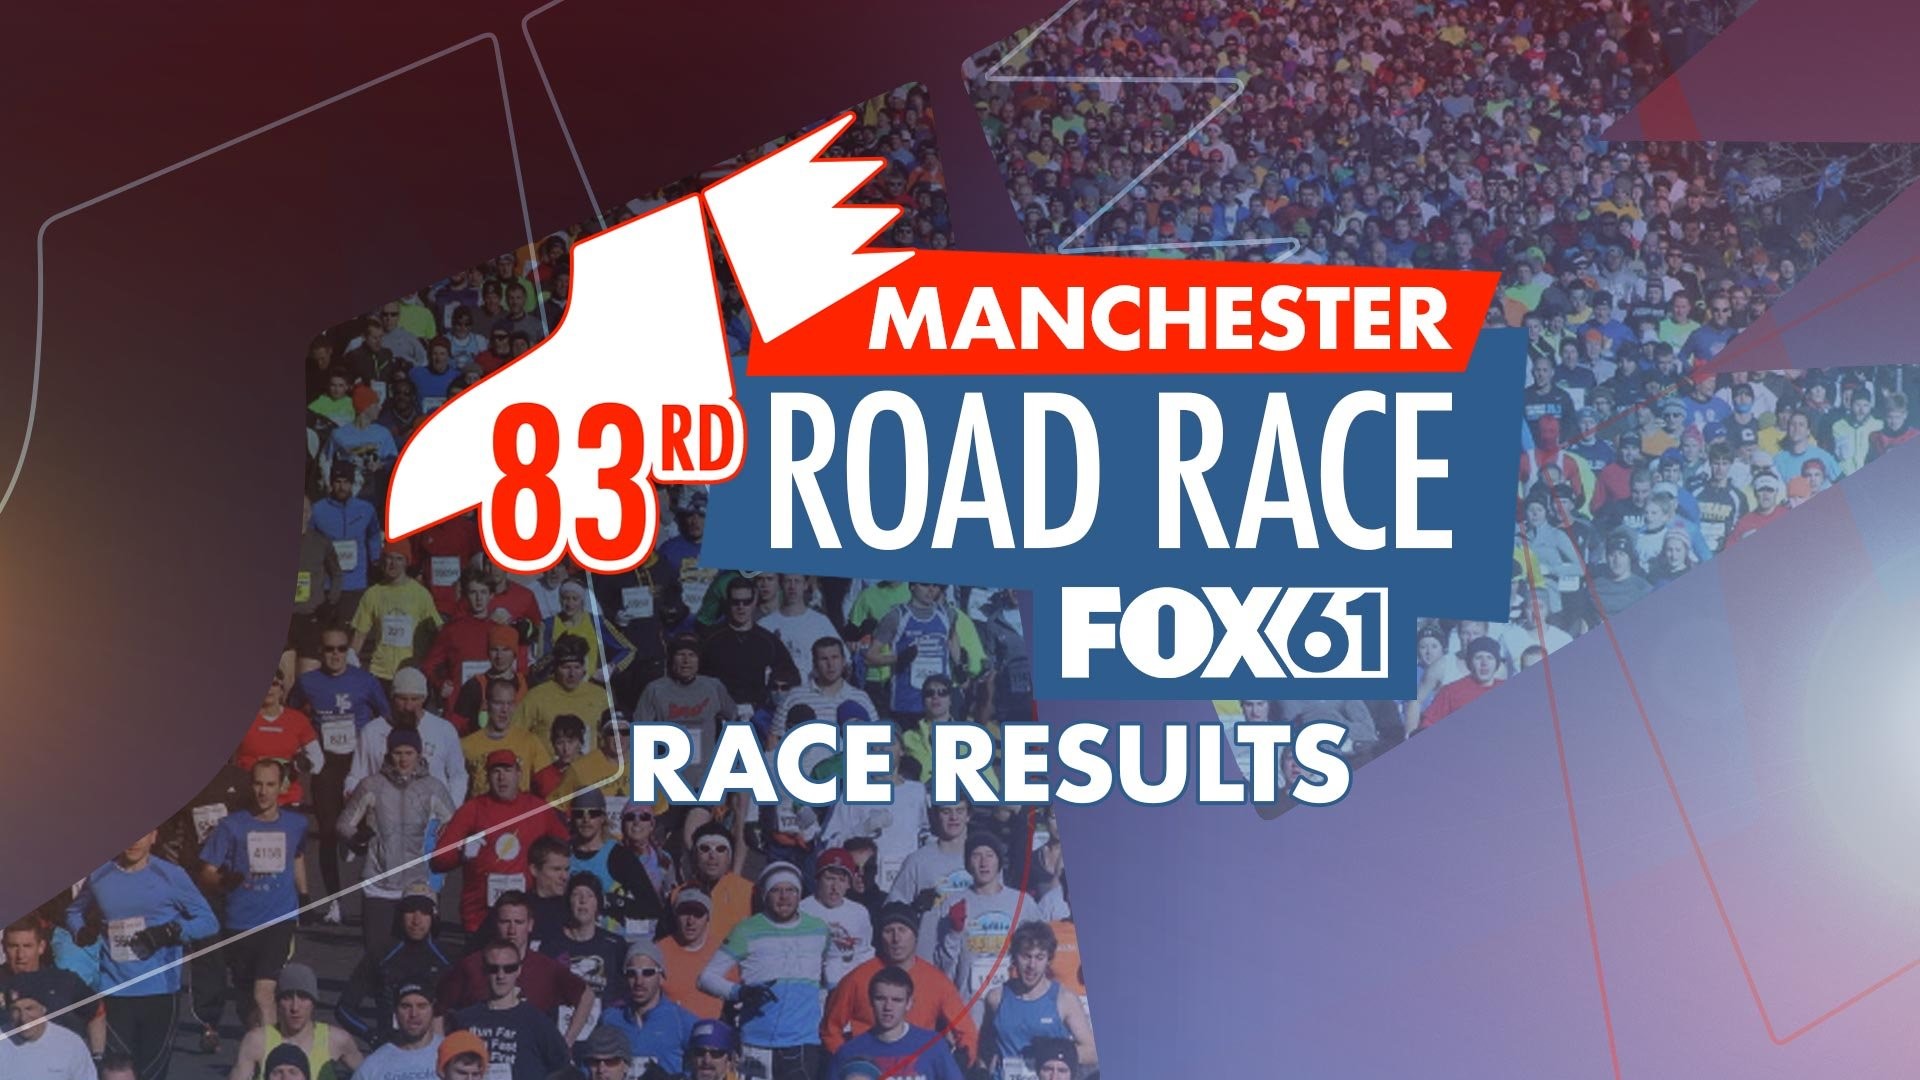 Manchester Road Race 2019 results